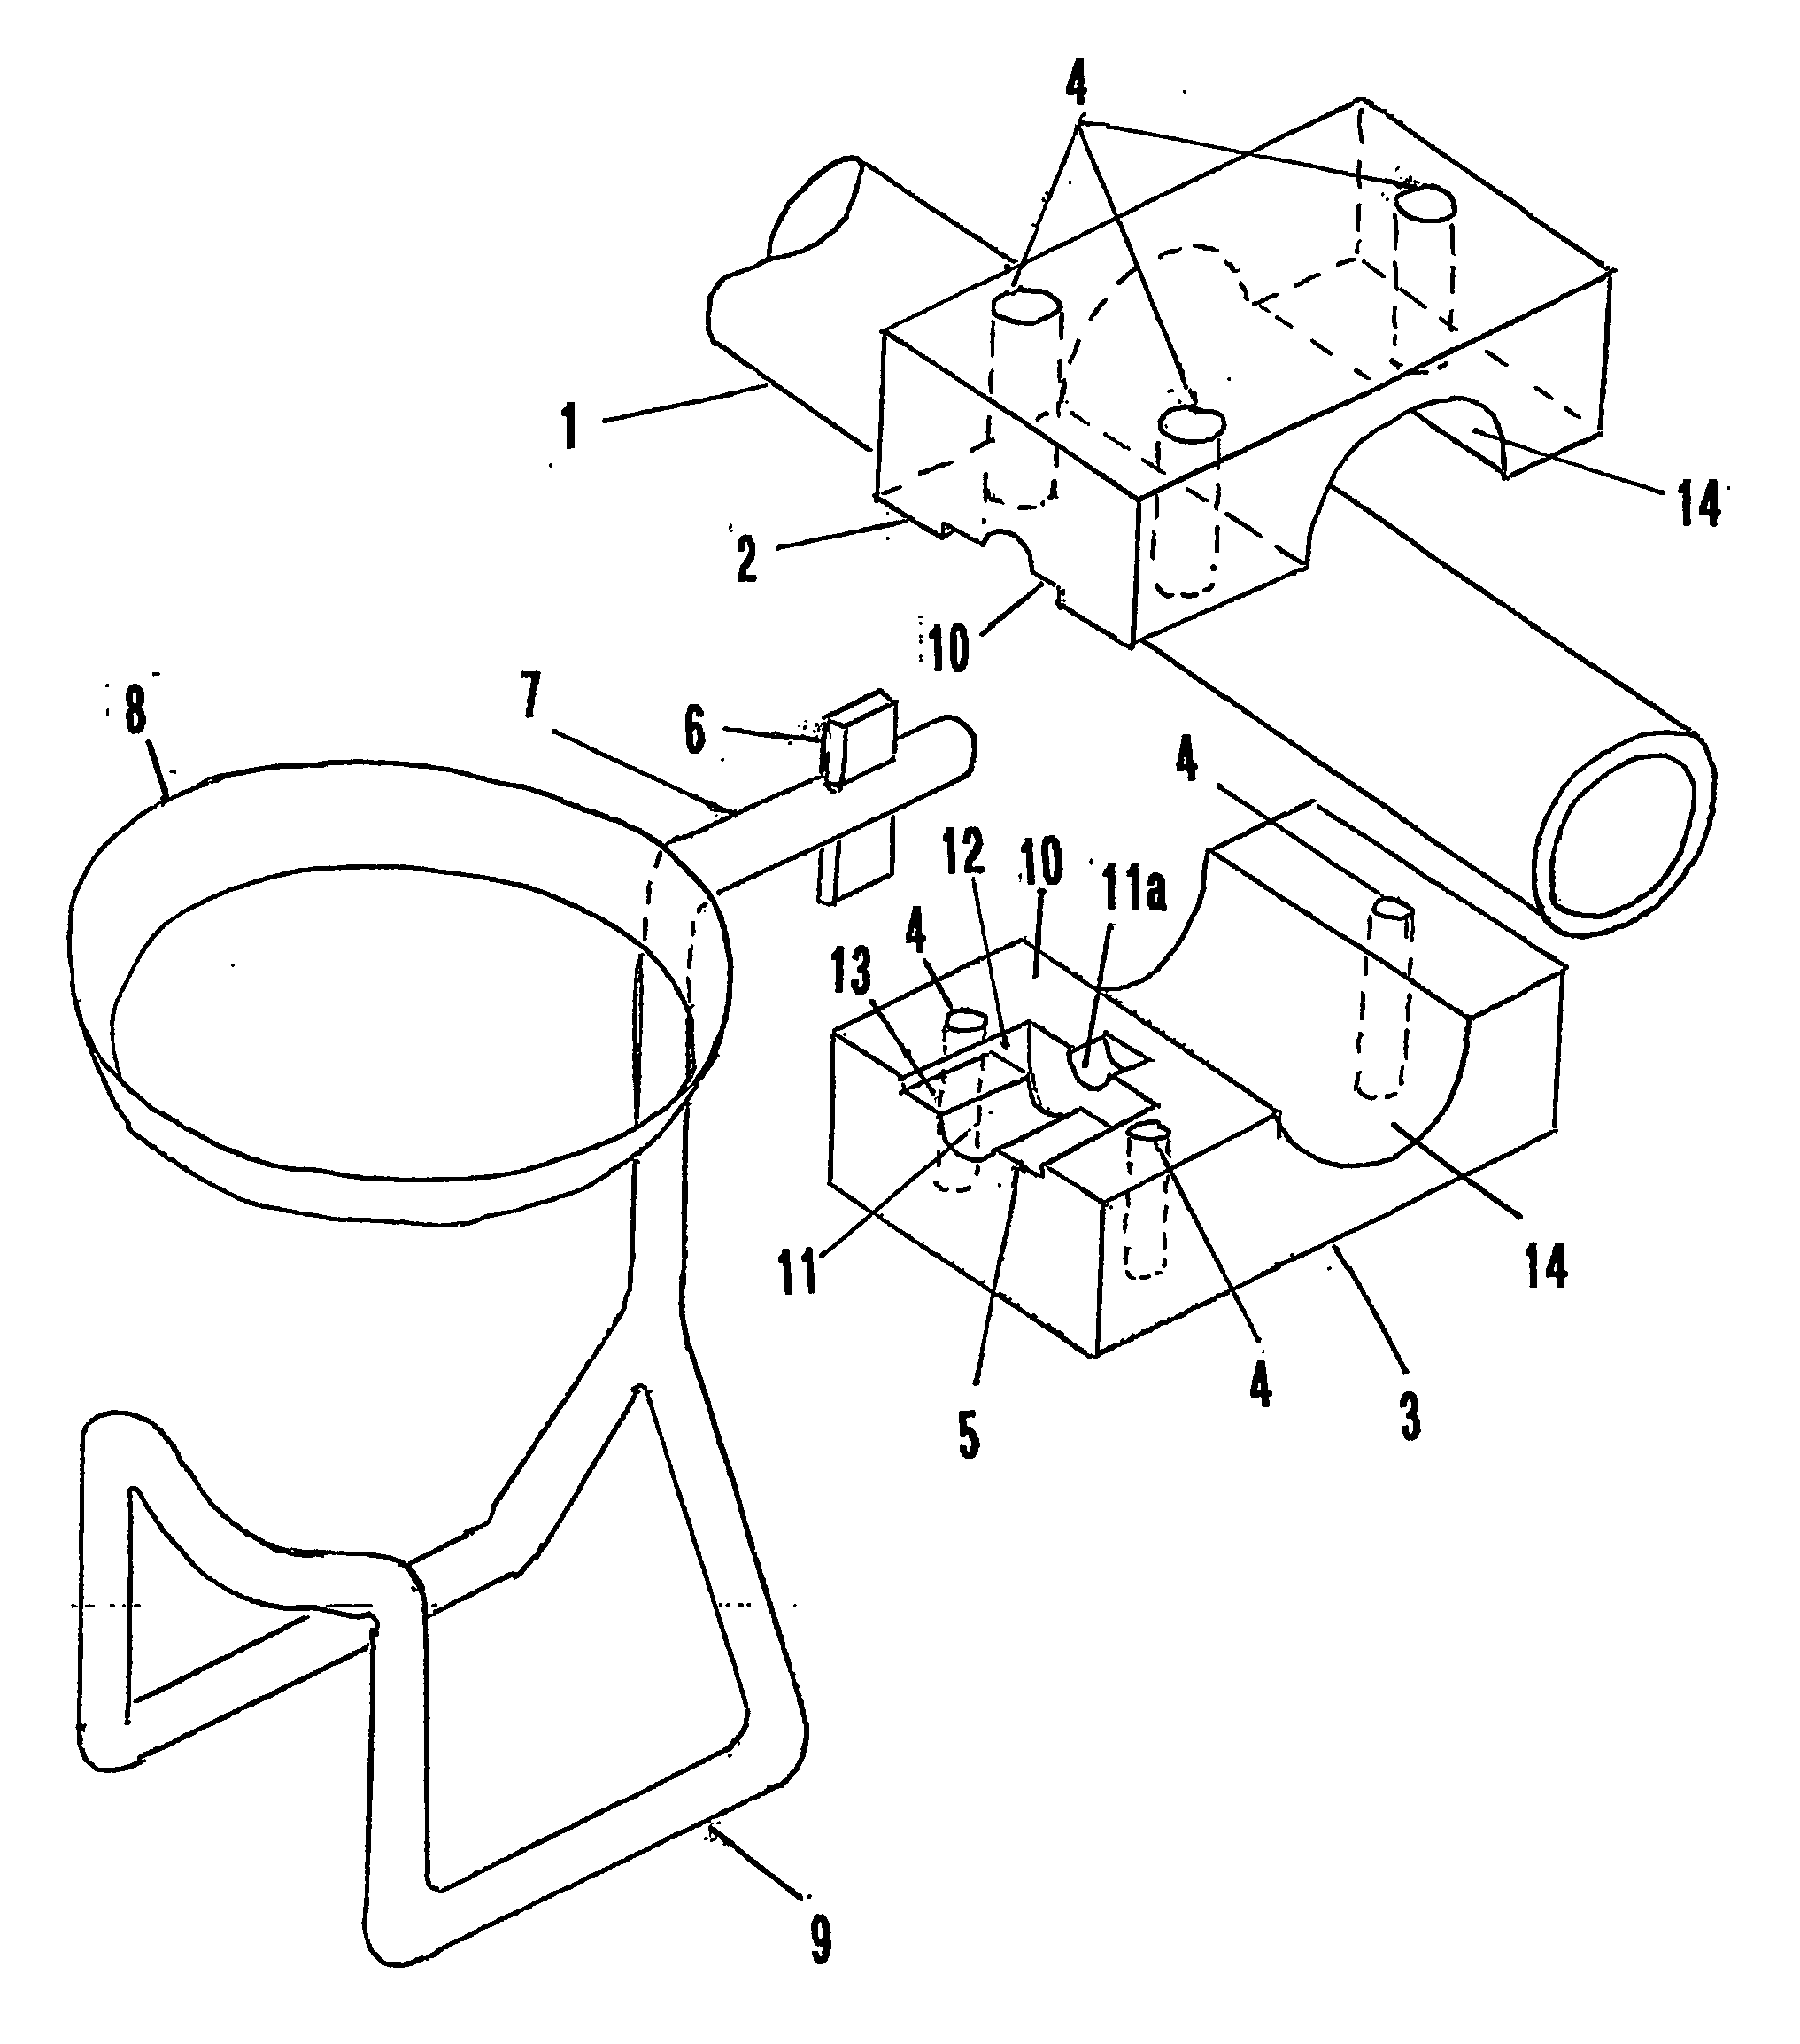 Drink container holding apparatus